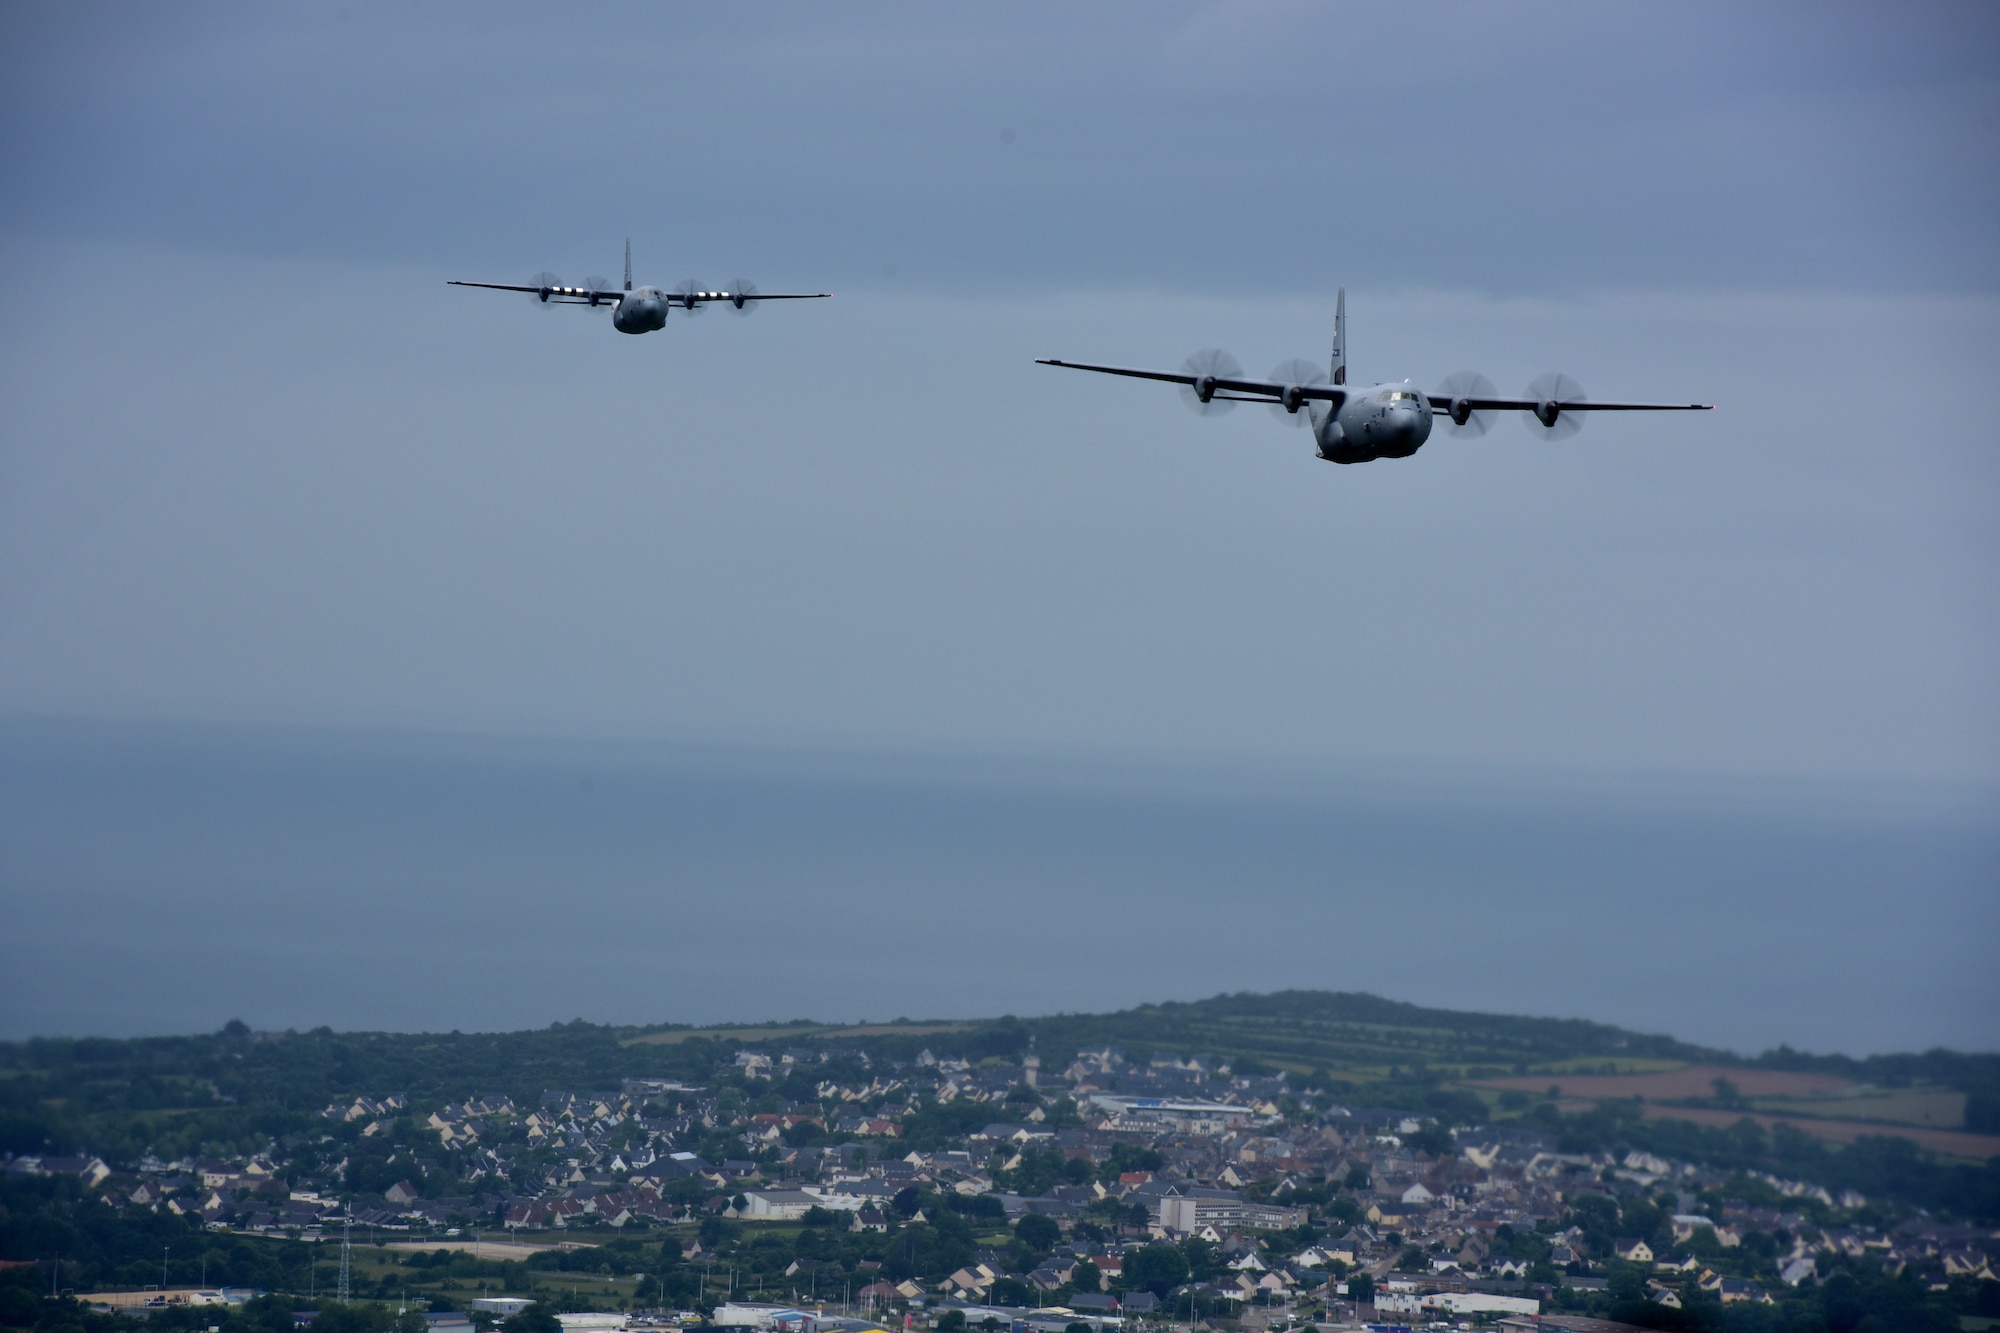 Two C-130s fly in the air